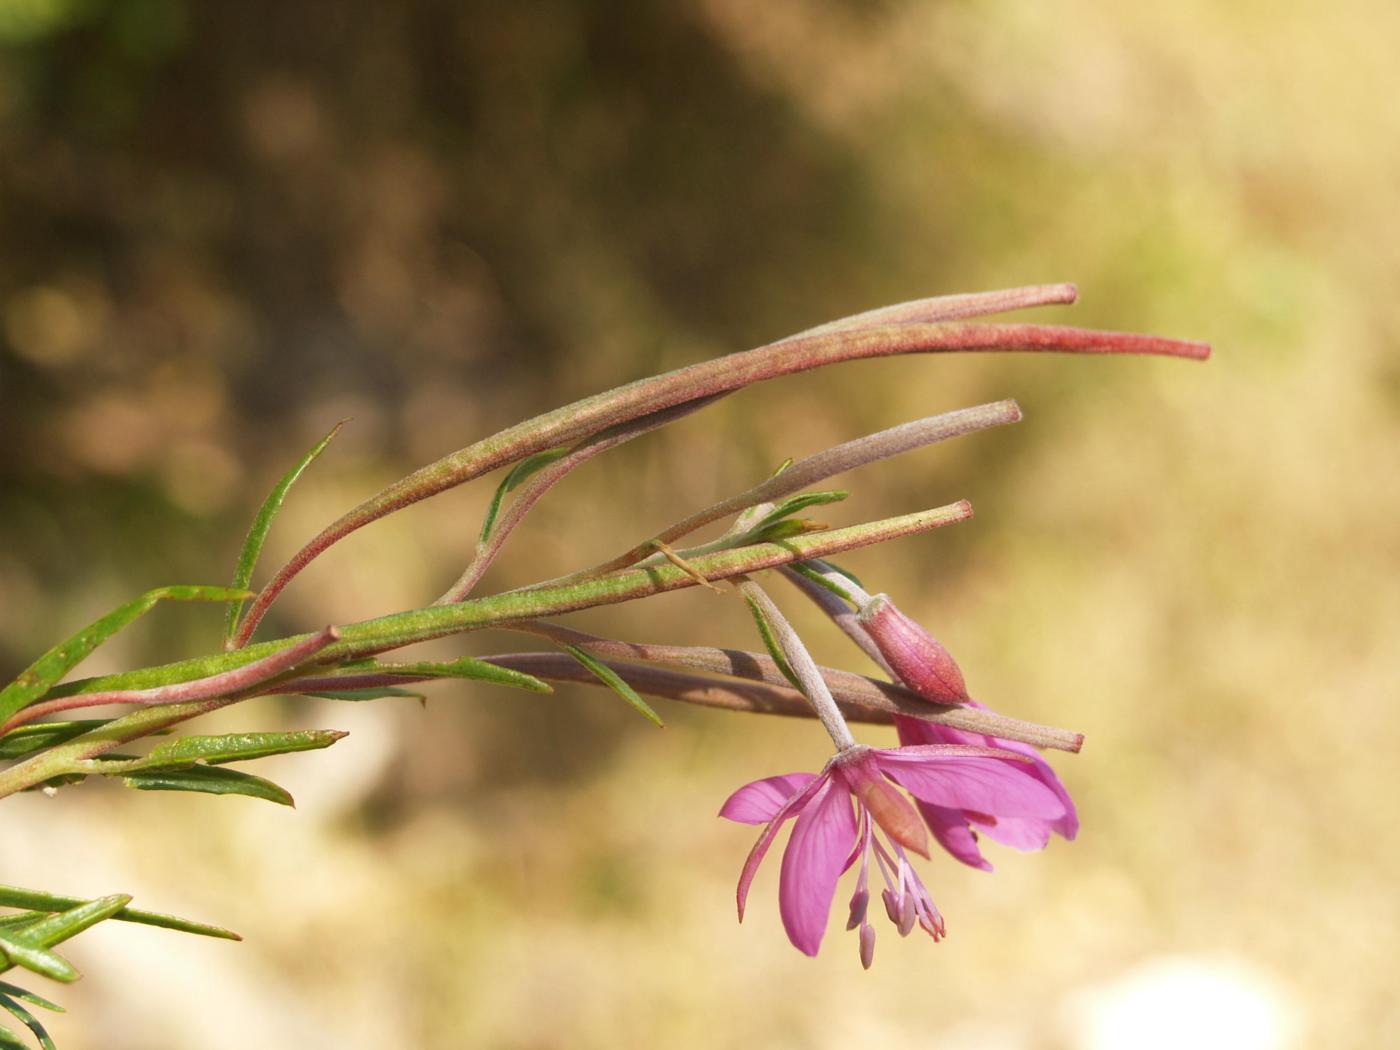 Willow-herb, [Rosemary-leaved] fruit